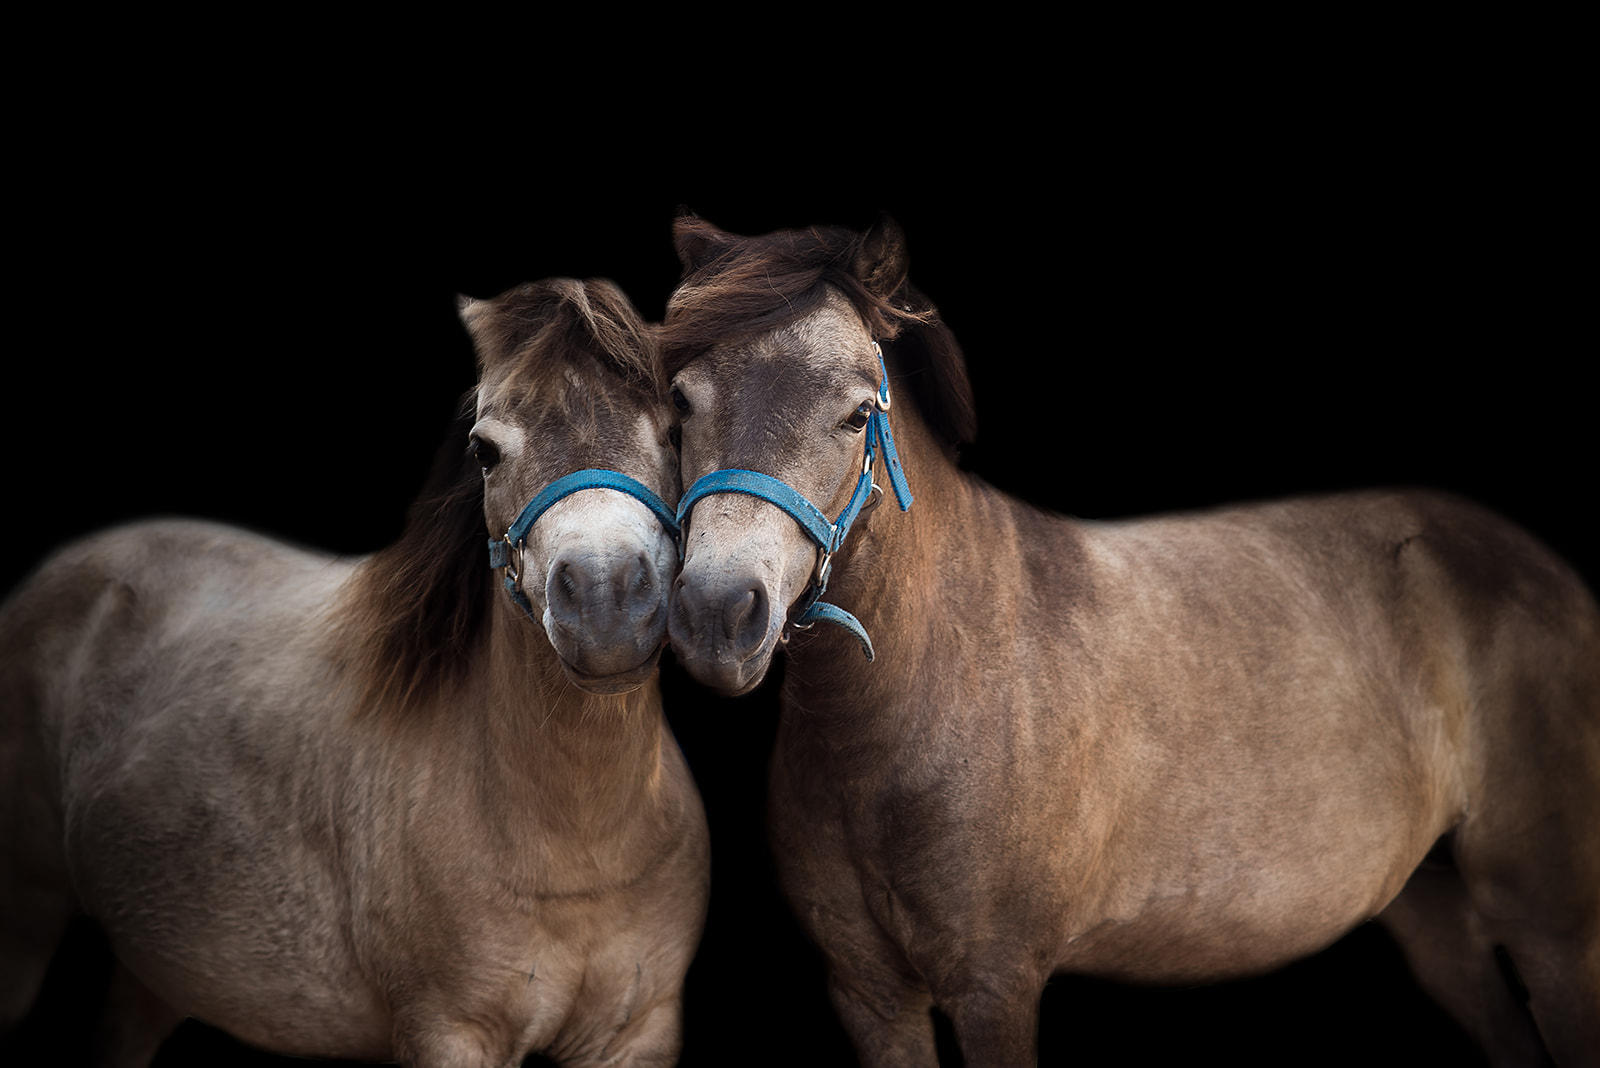 Two miniature horses photographed by Dark Horse Photography